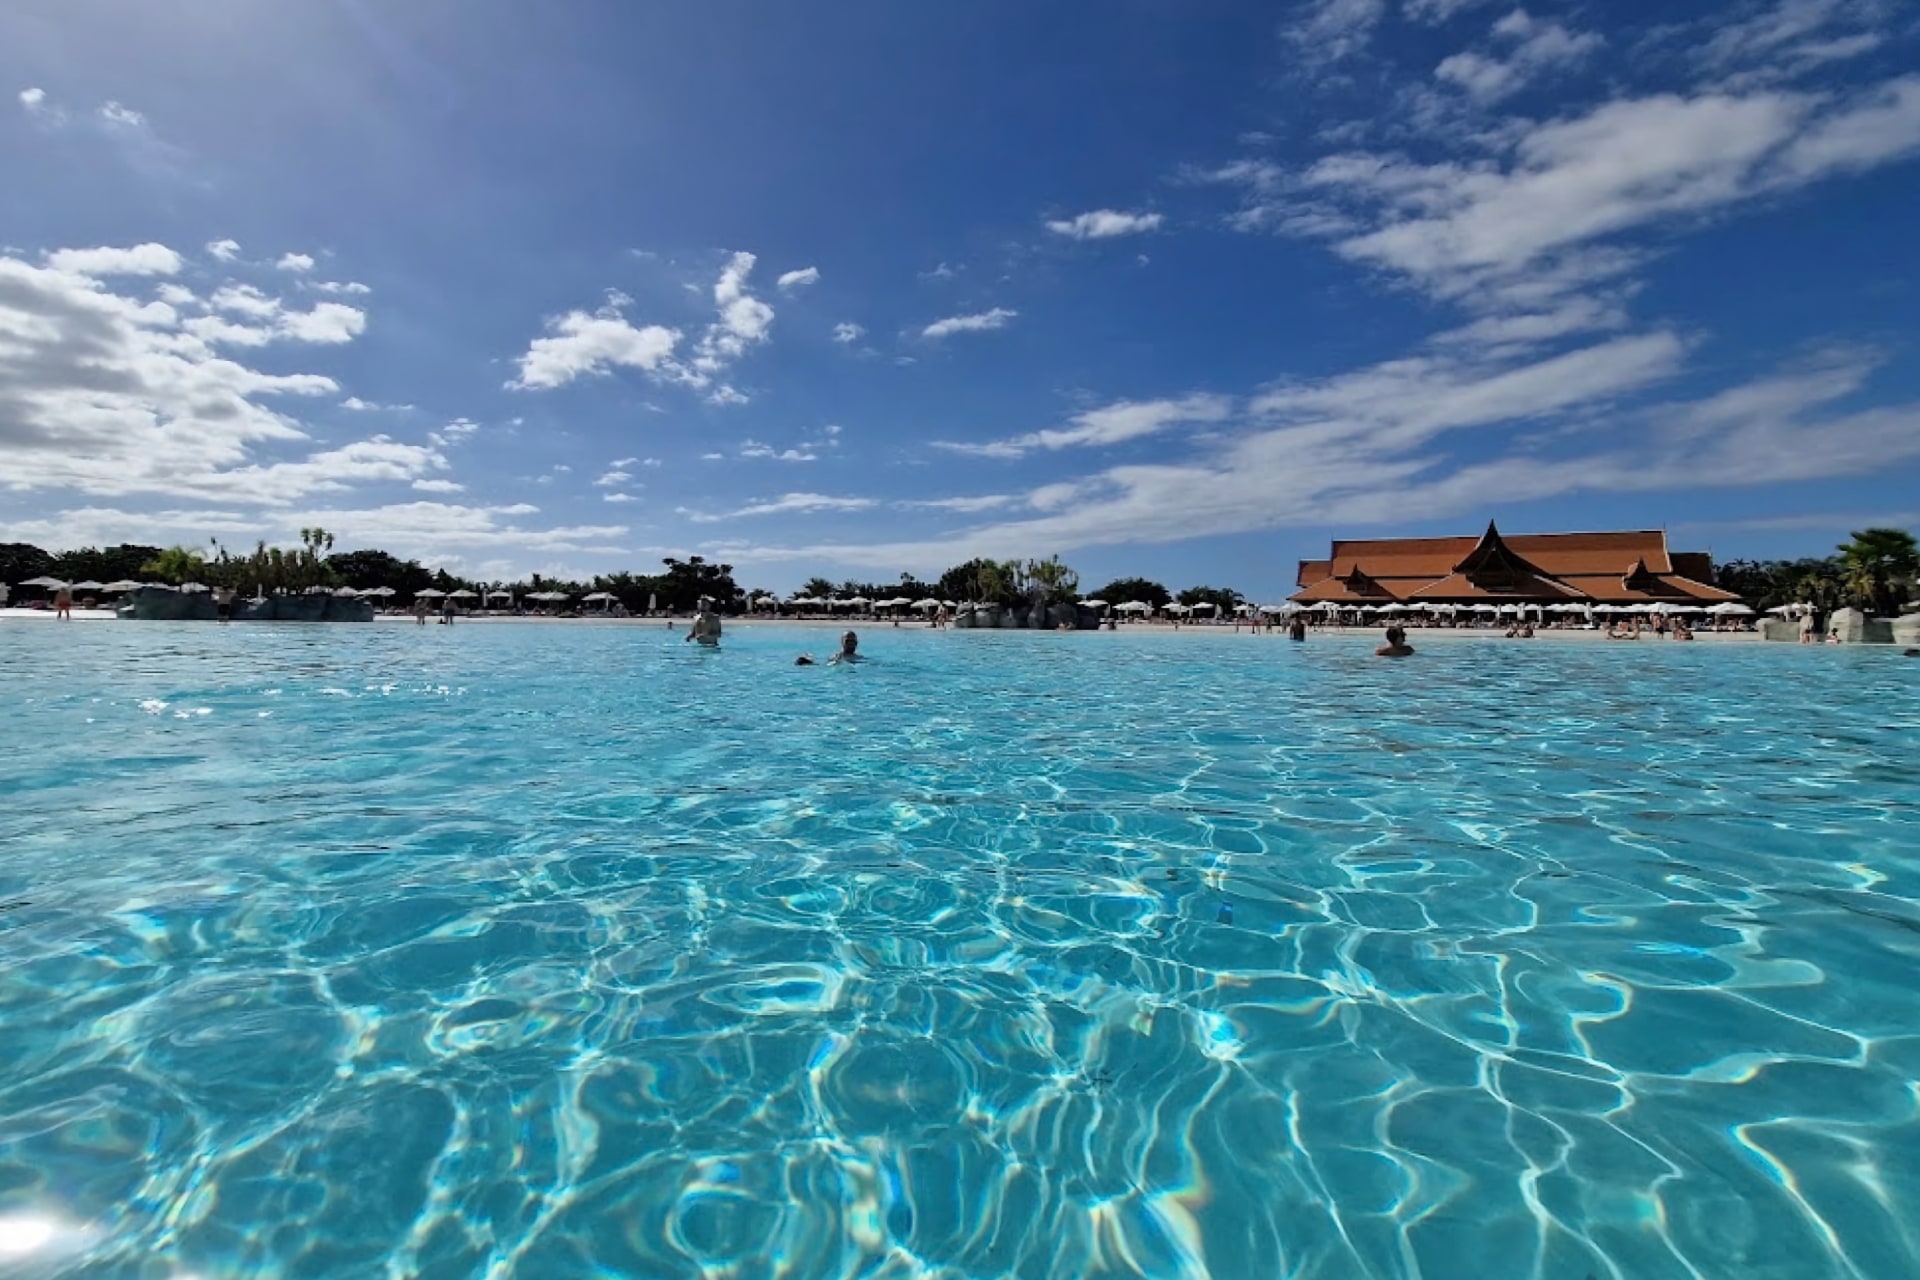 Crystal-clear water pool at Siam Park, Tenerife, offering a refreshing oasis for visitors to relax and enjoy